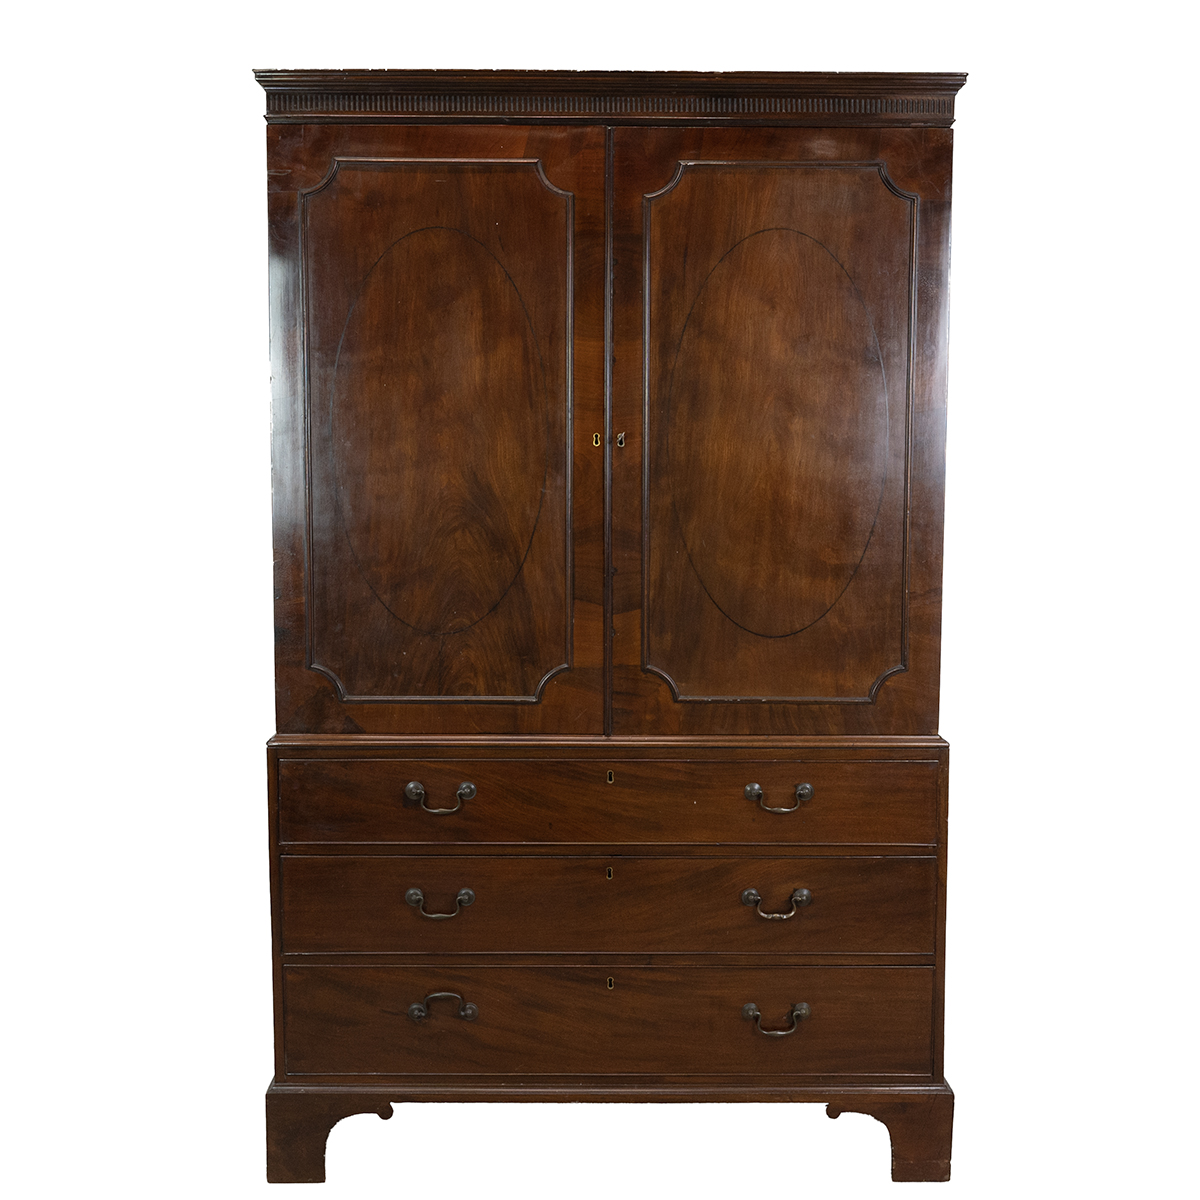 Georgian flame mahogany linen press, three drawers, with swan neck brass handles below cabinet wi...